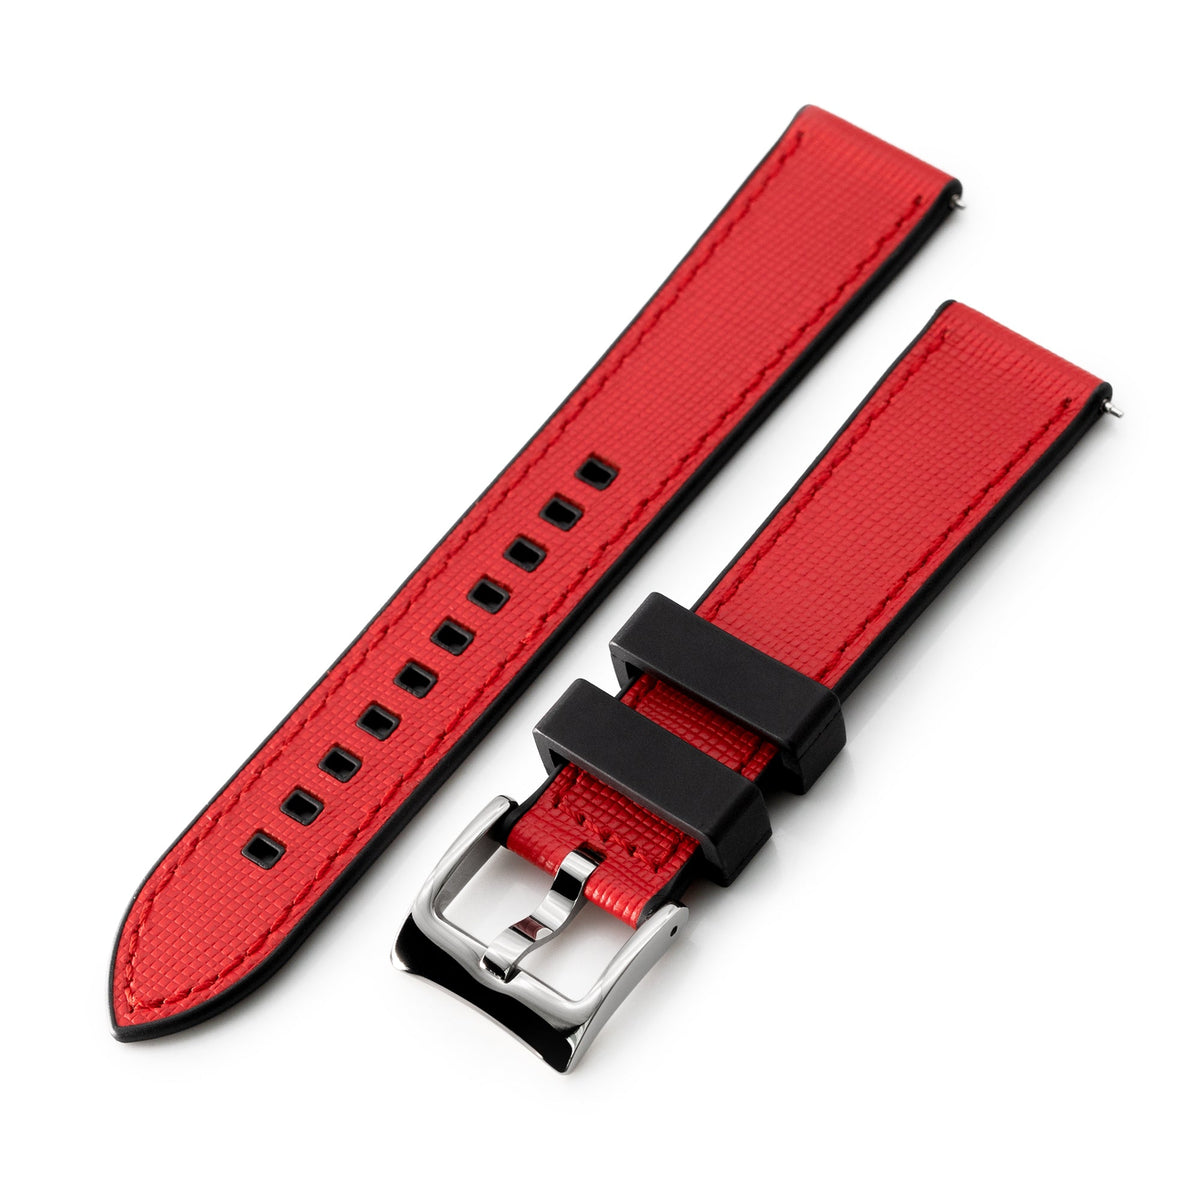 20mm Red / Black Quick Release Leather-FKM Rubber Sports Watch Strap Strapcode Watch Bands